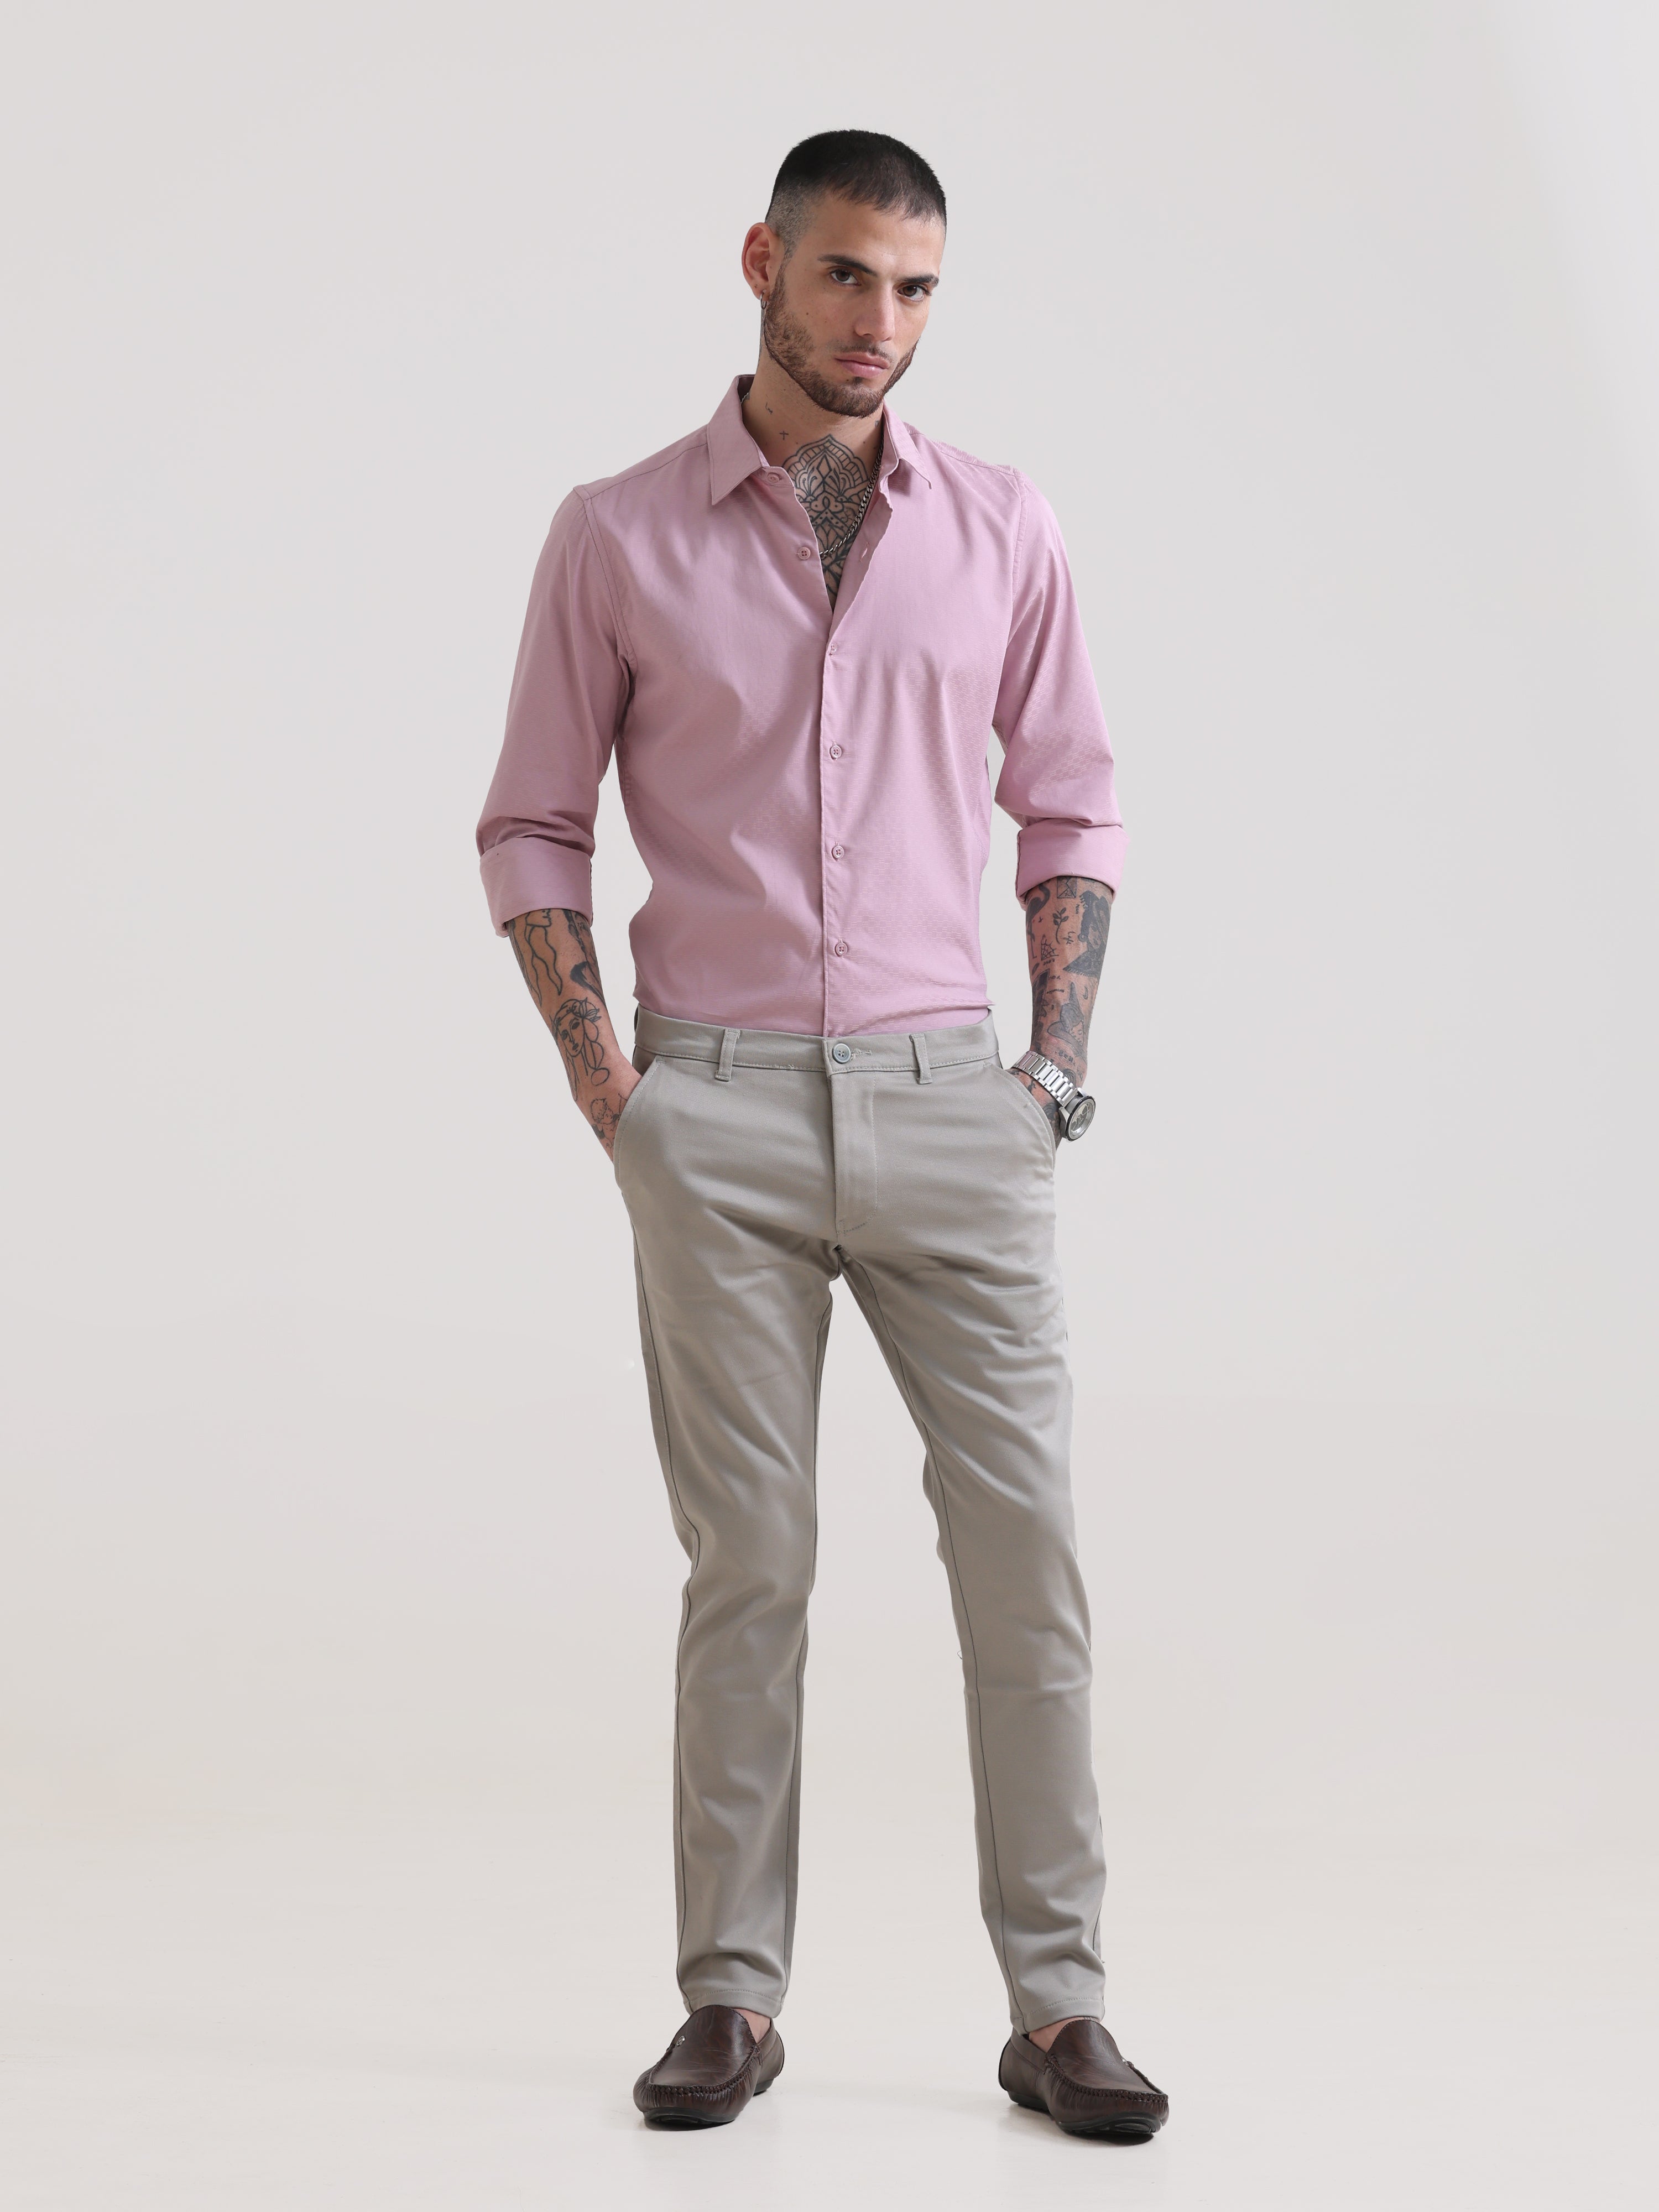 Salmon Peach Textured Solid ShirtRs. 1399.00